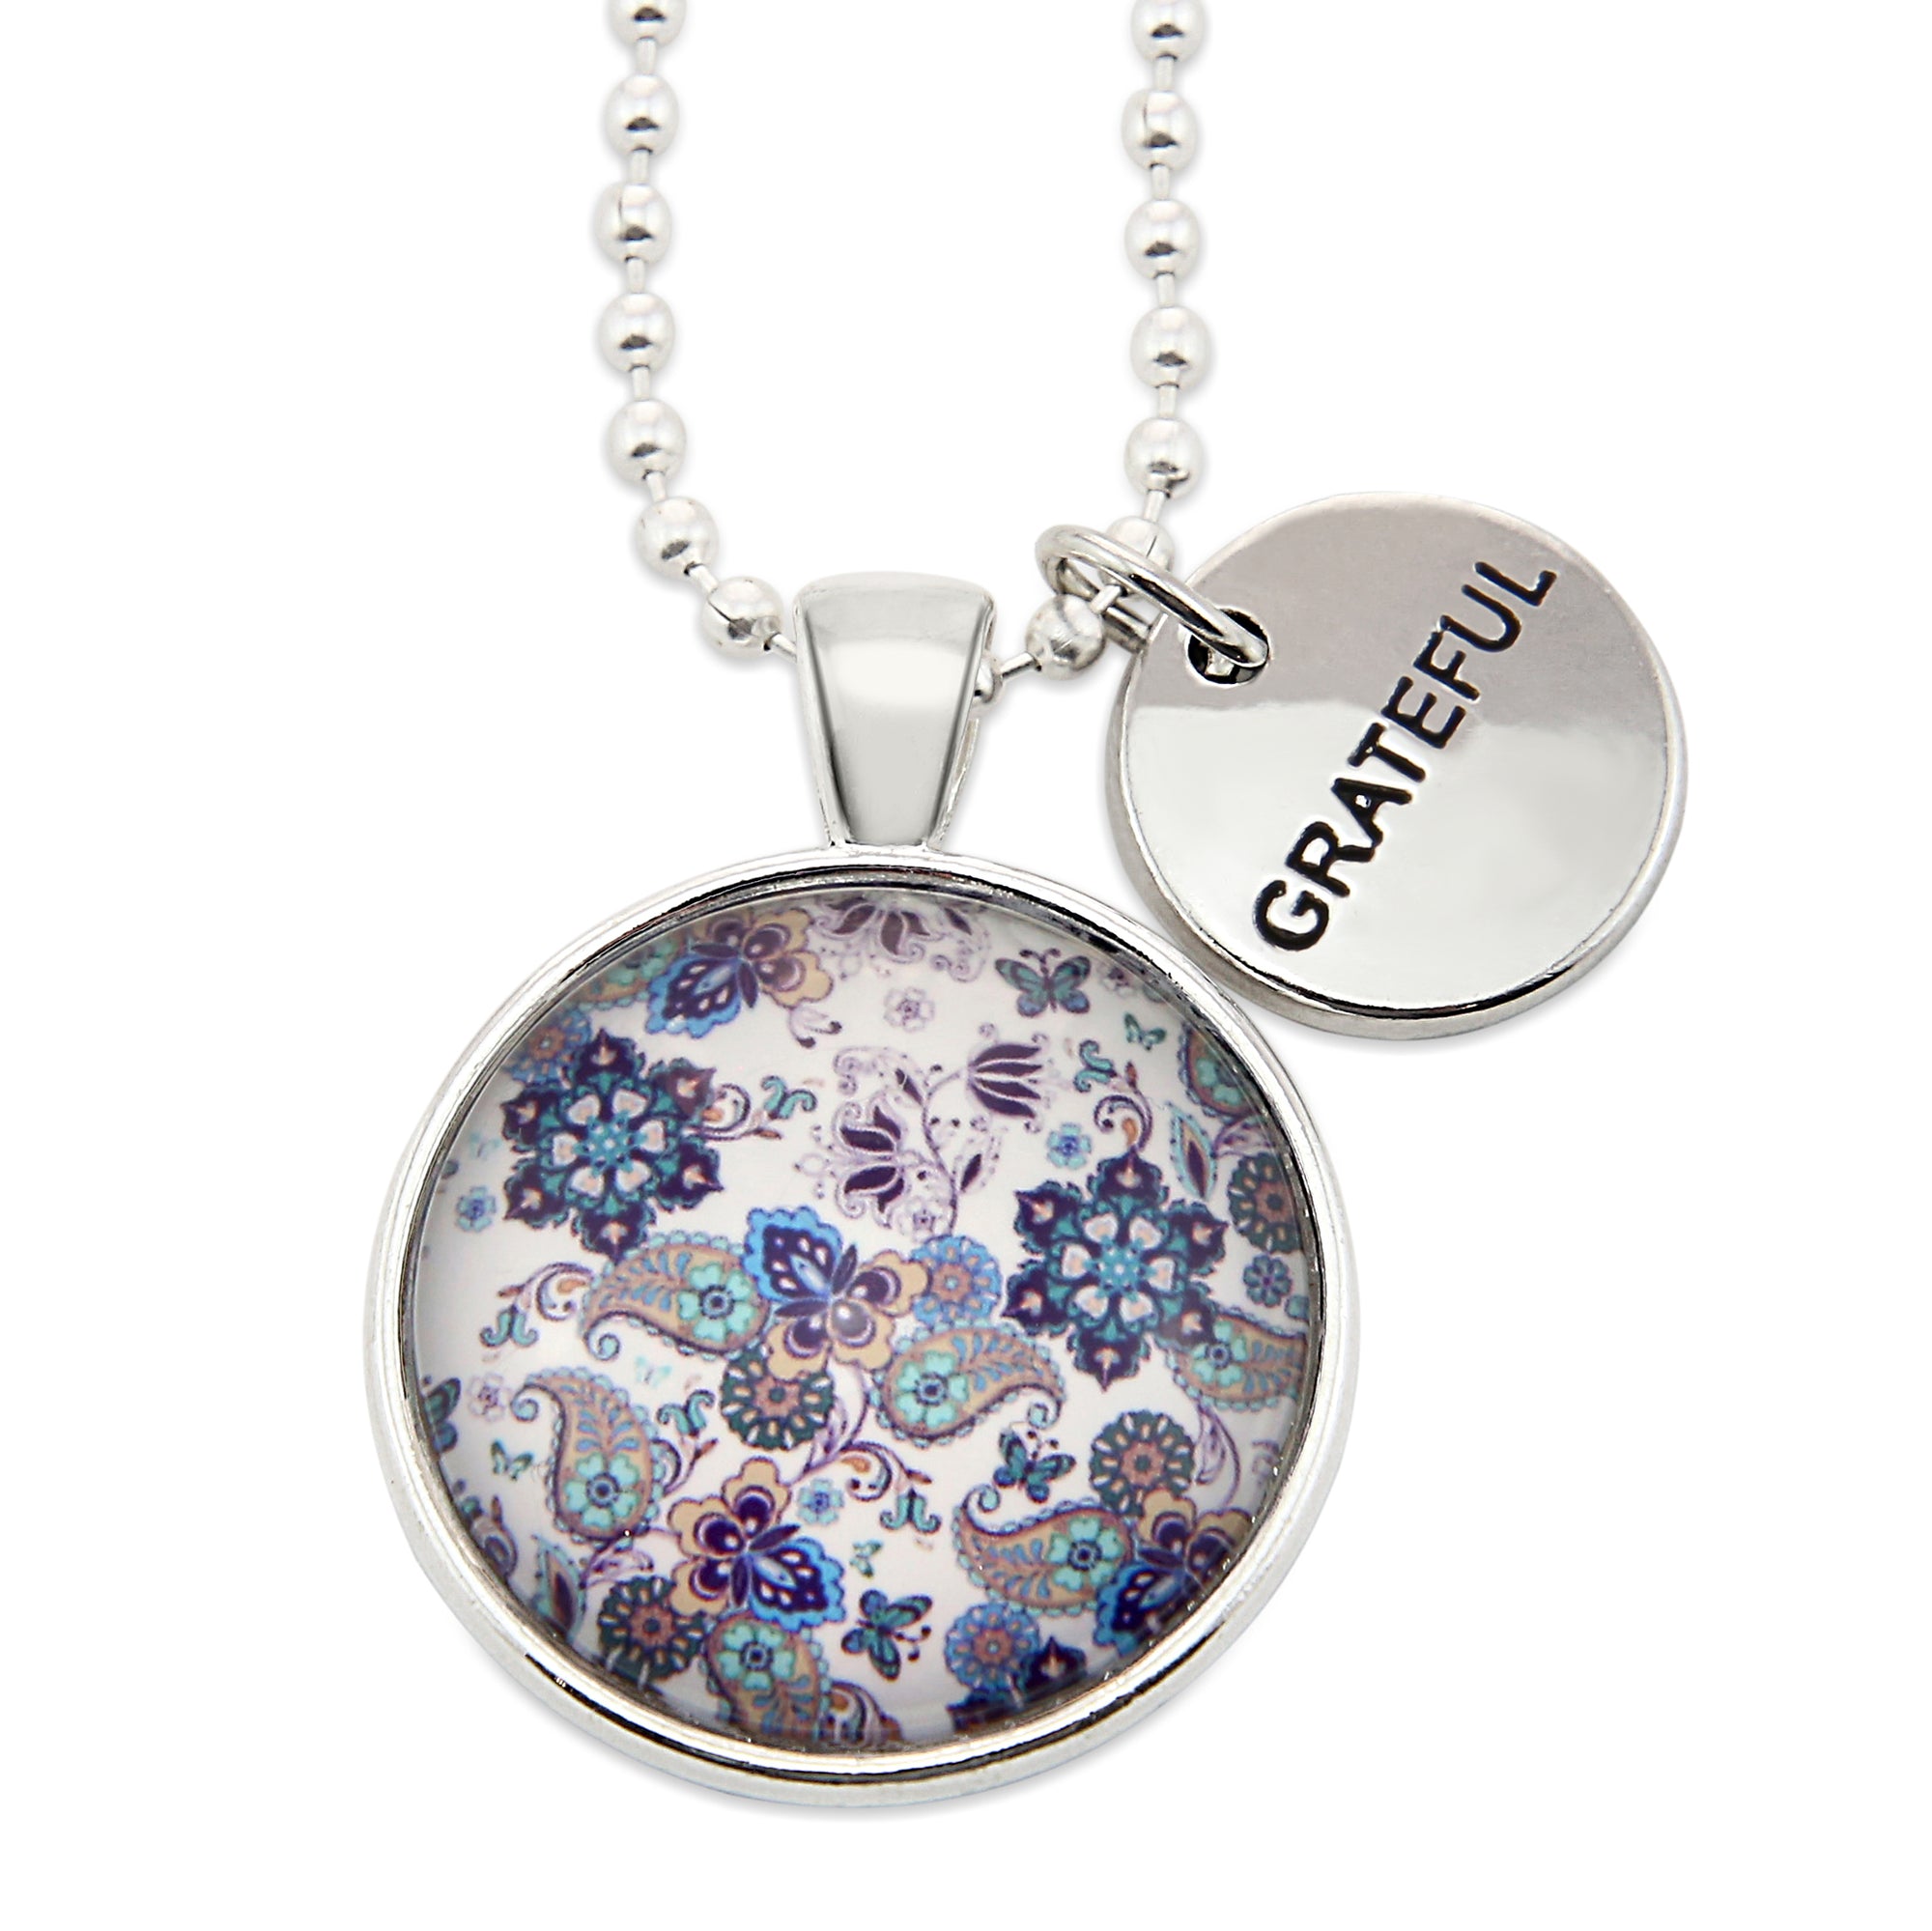 BOHO Collection - Bright Silver 'GRATEFUL' Necklace - Rhapsody (11242)